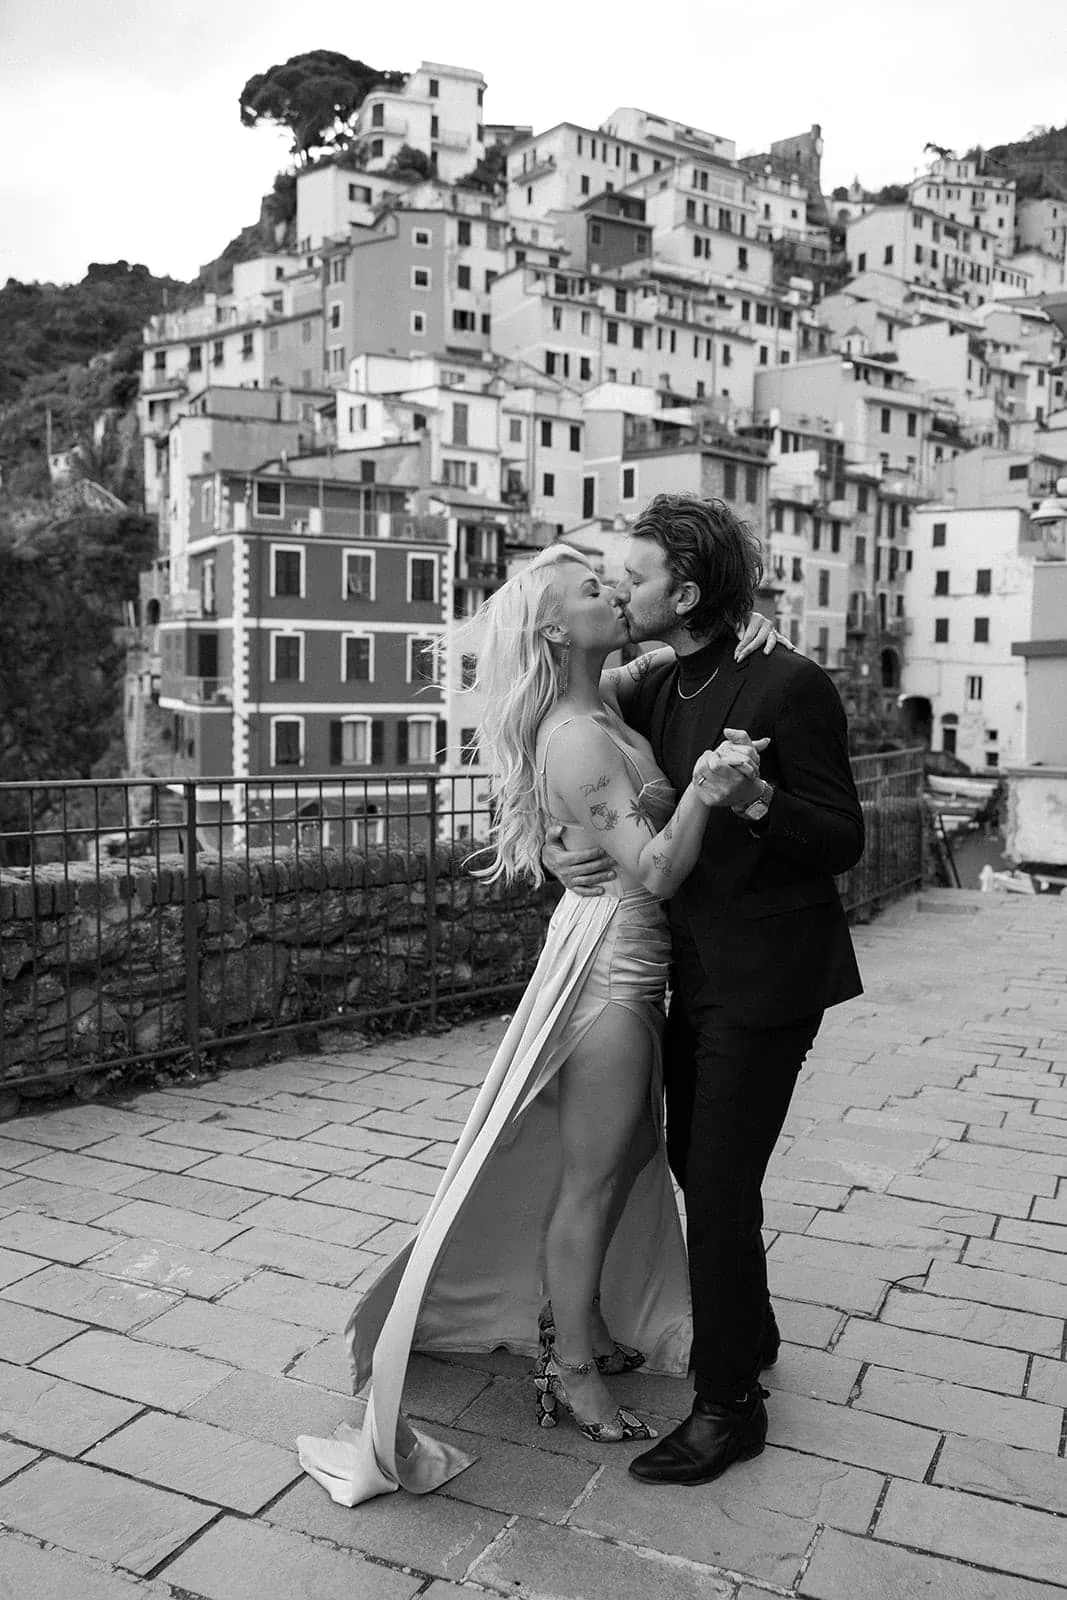 Newly married couple kiss in Cinque Terre